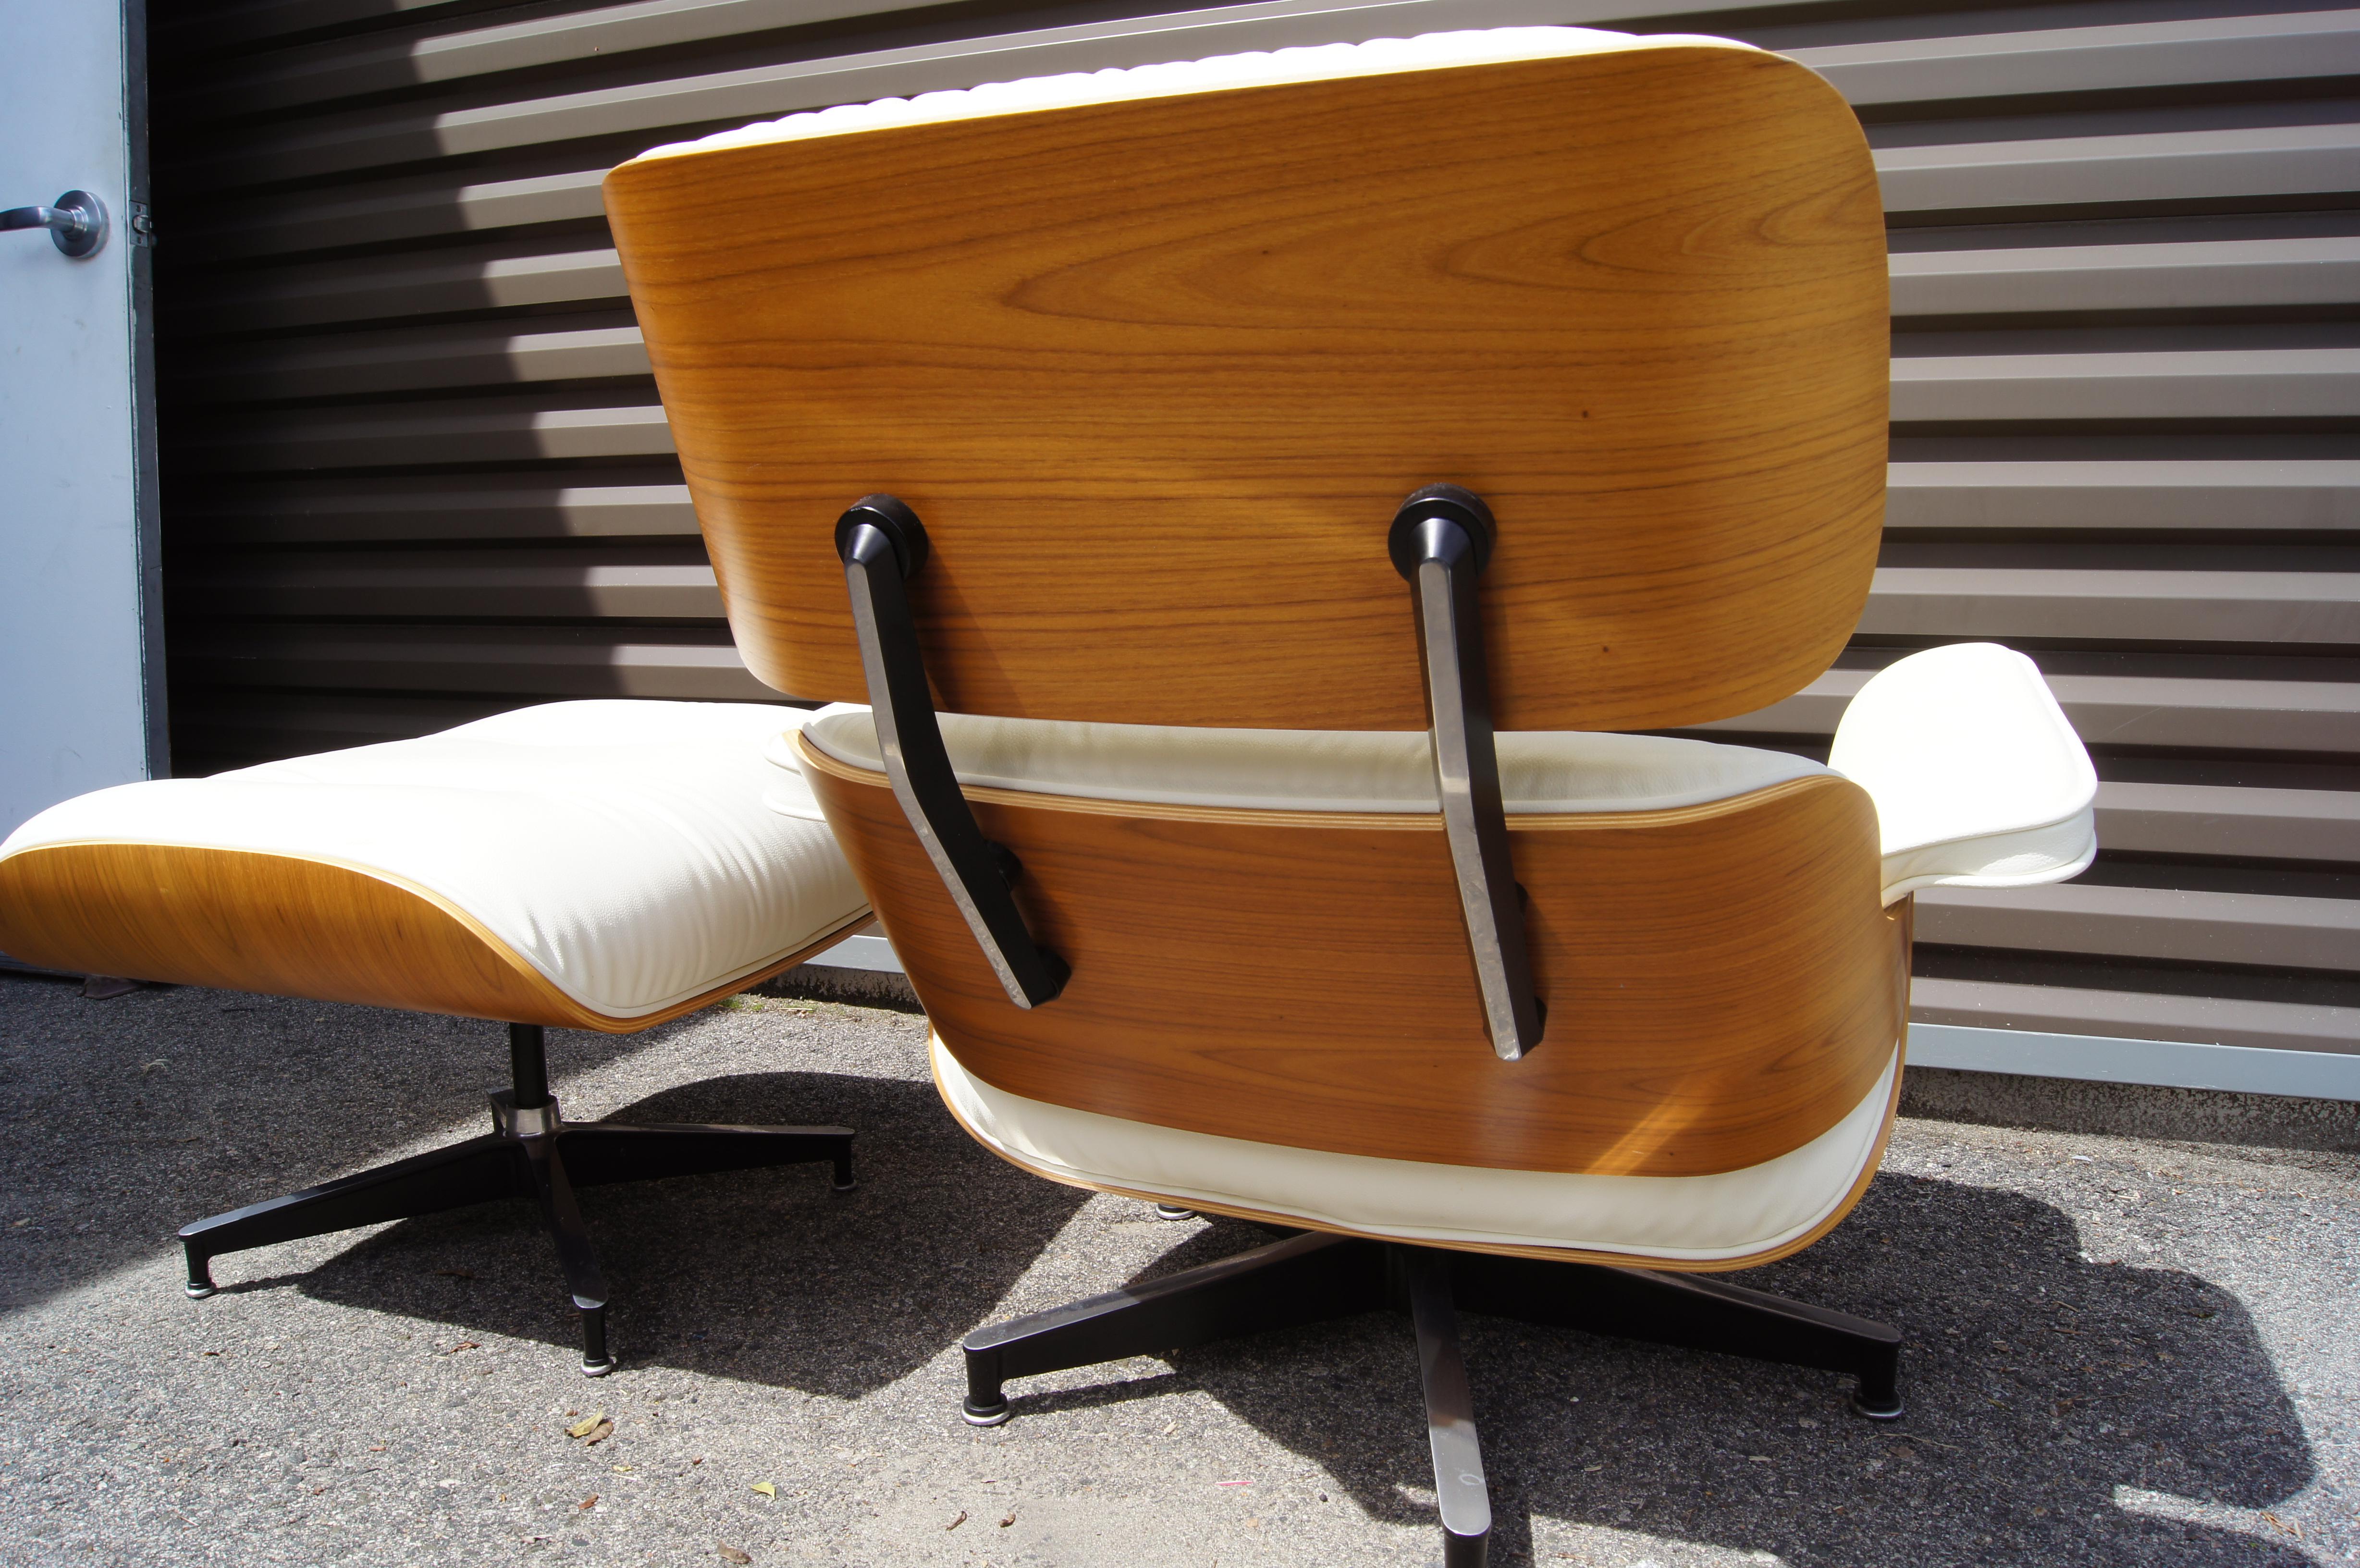 Contemporary Lounge Chair & Ottoman, Model 670/671, by Charles & Ray Eames for Herman Miller